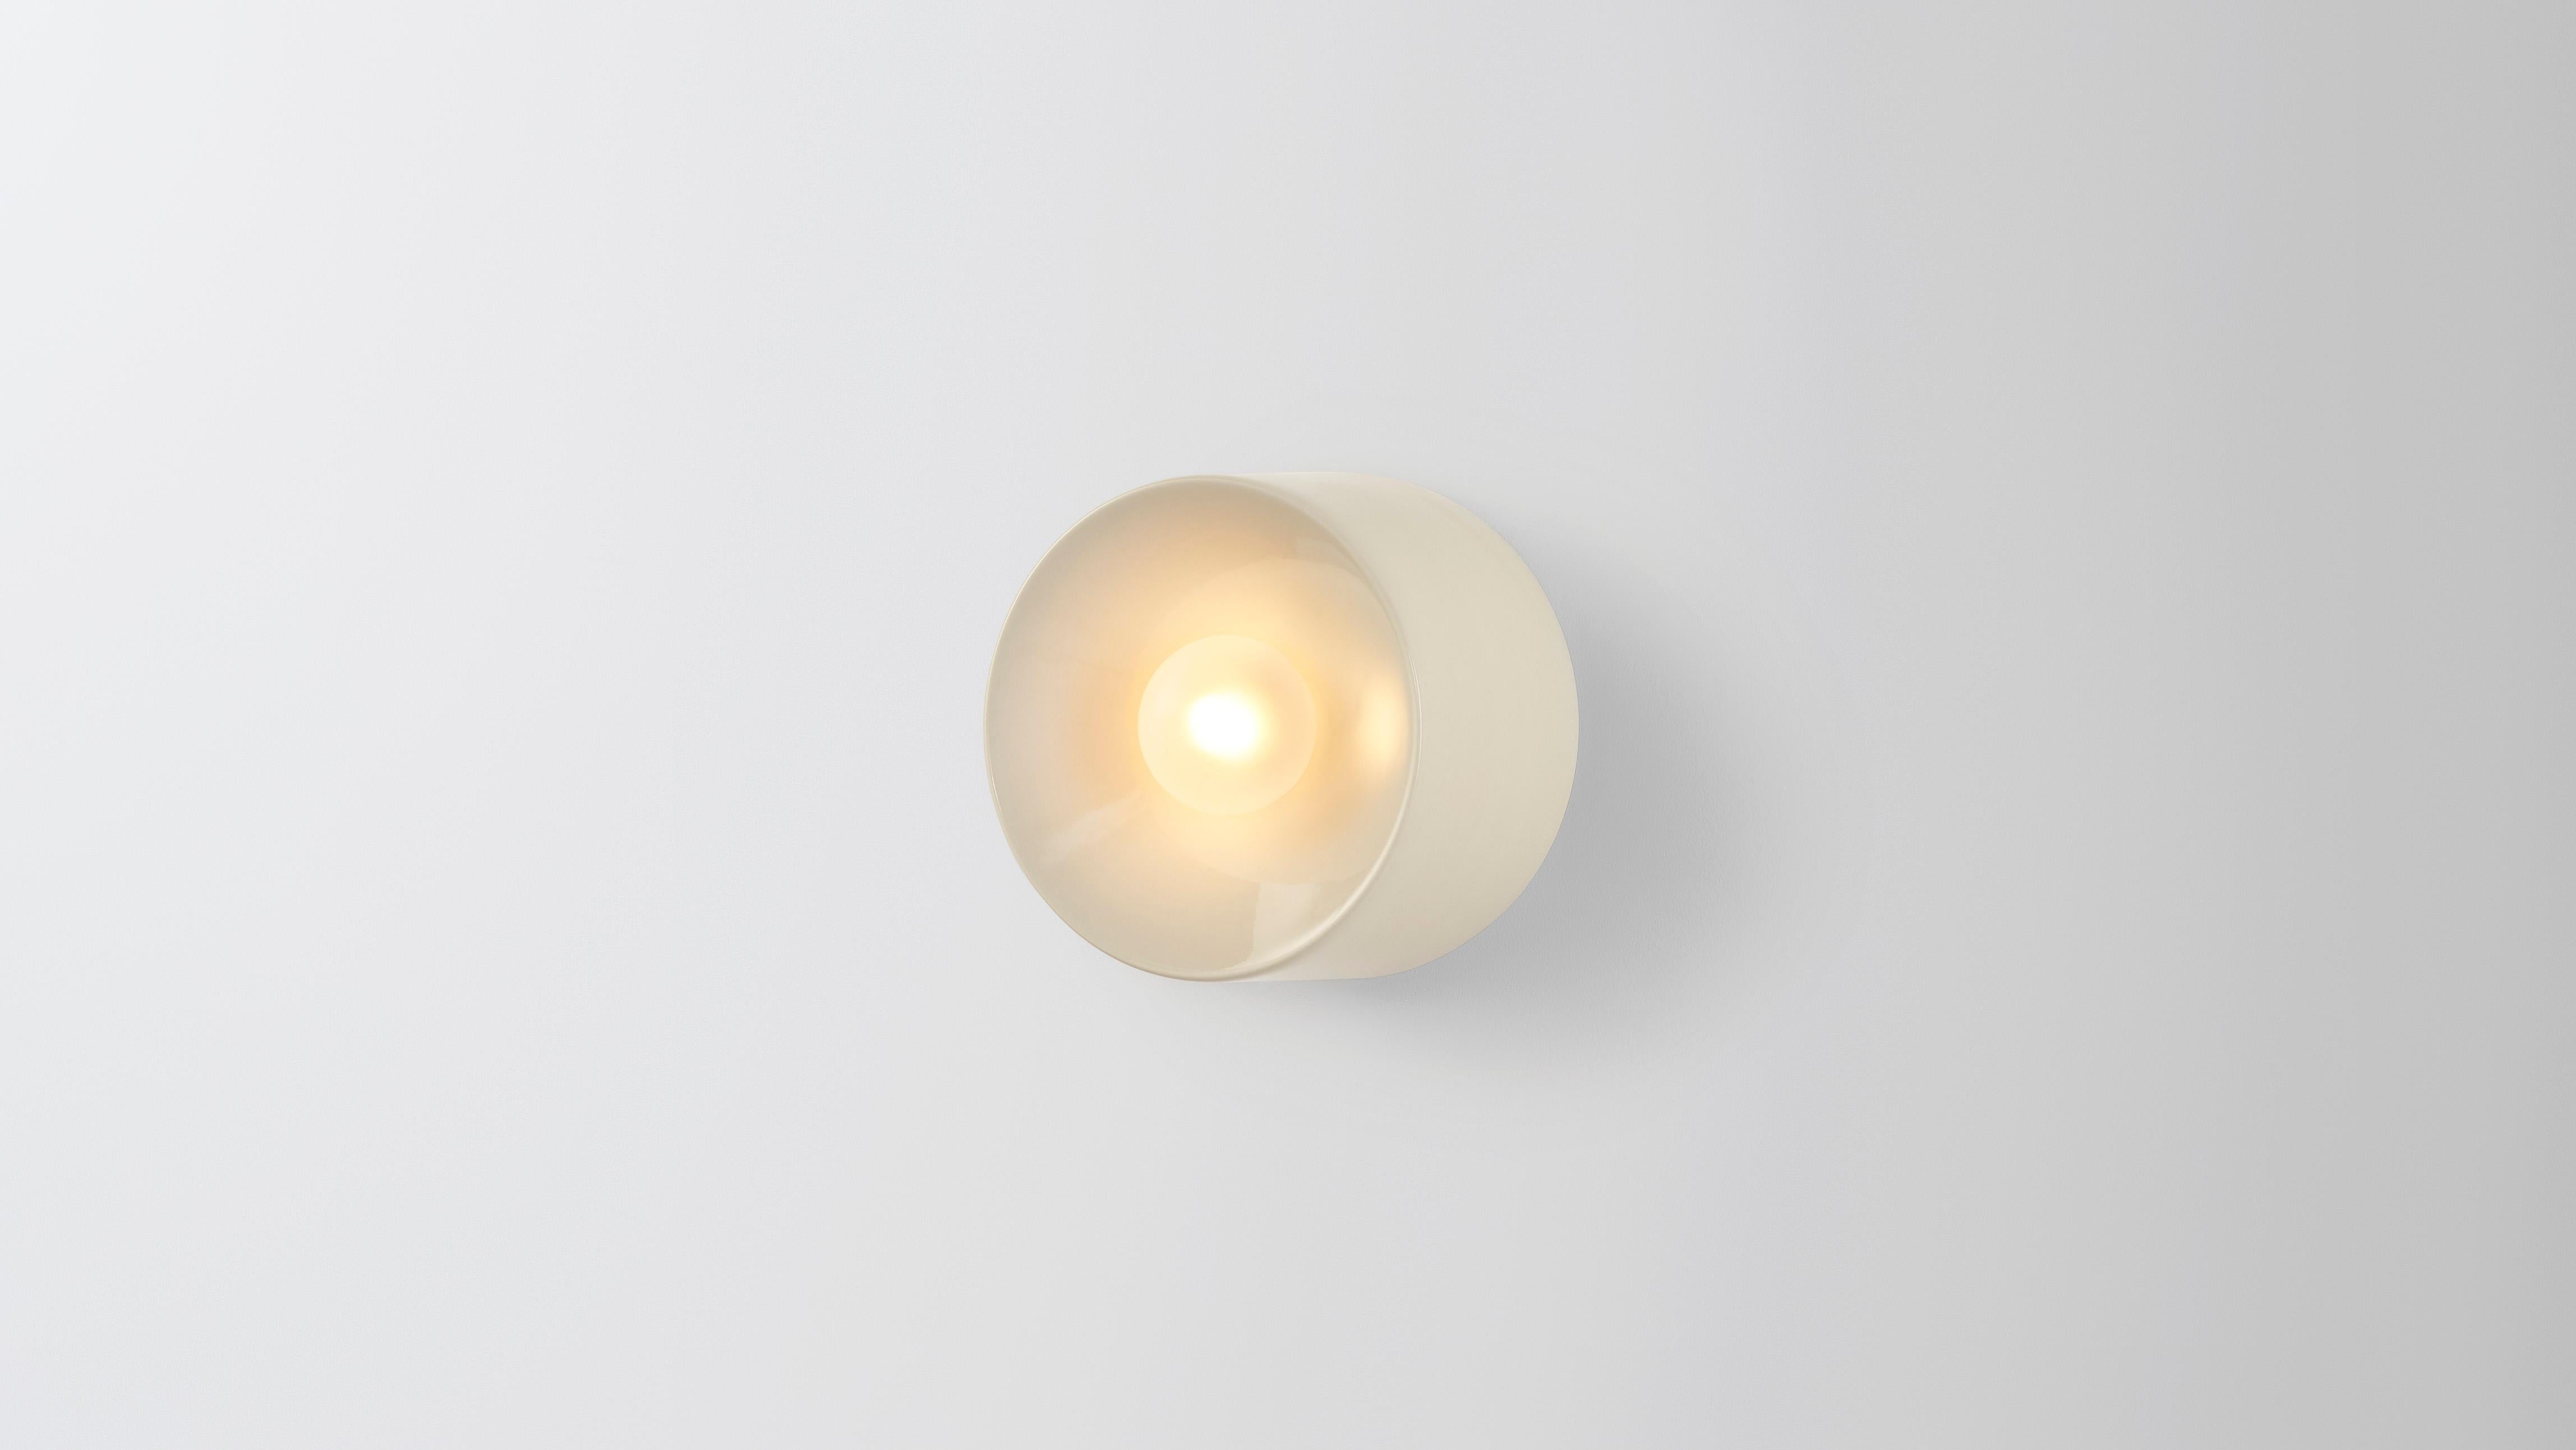 Anton mini in ceramic by Volker Haug. 
Anton series.
Dimensions: Ø 13 x D 8 cm.
Materials: Cast Ceramic.
Glaze: Clear.
Lamp: G9 LED (240V / 120V US). 12V option available.
Glass bulb : 4.5 cm ø, Frosted
Weight: 1kg

Anton Mini (Ø13 cm) is cast as